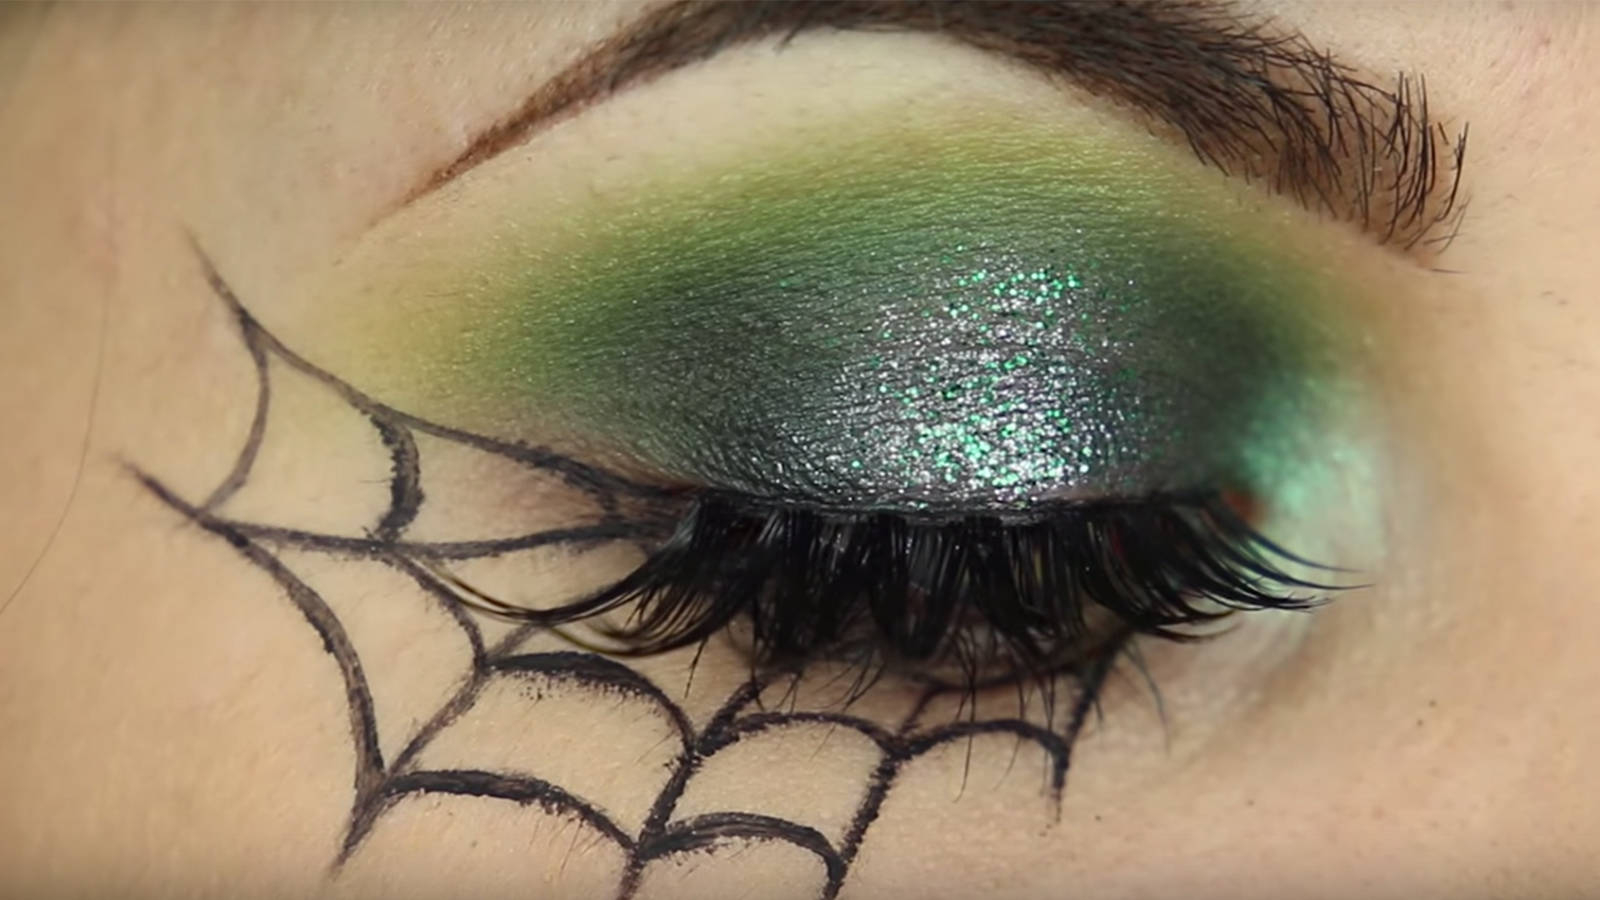 Spiderweb Eye Makeup 8 Easy Halloween Makeup Tutorials For The Cheap Lazy Galore